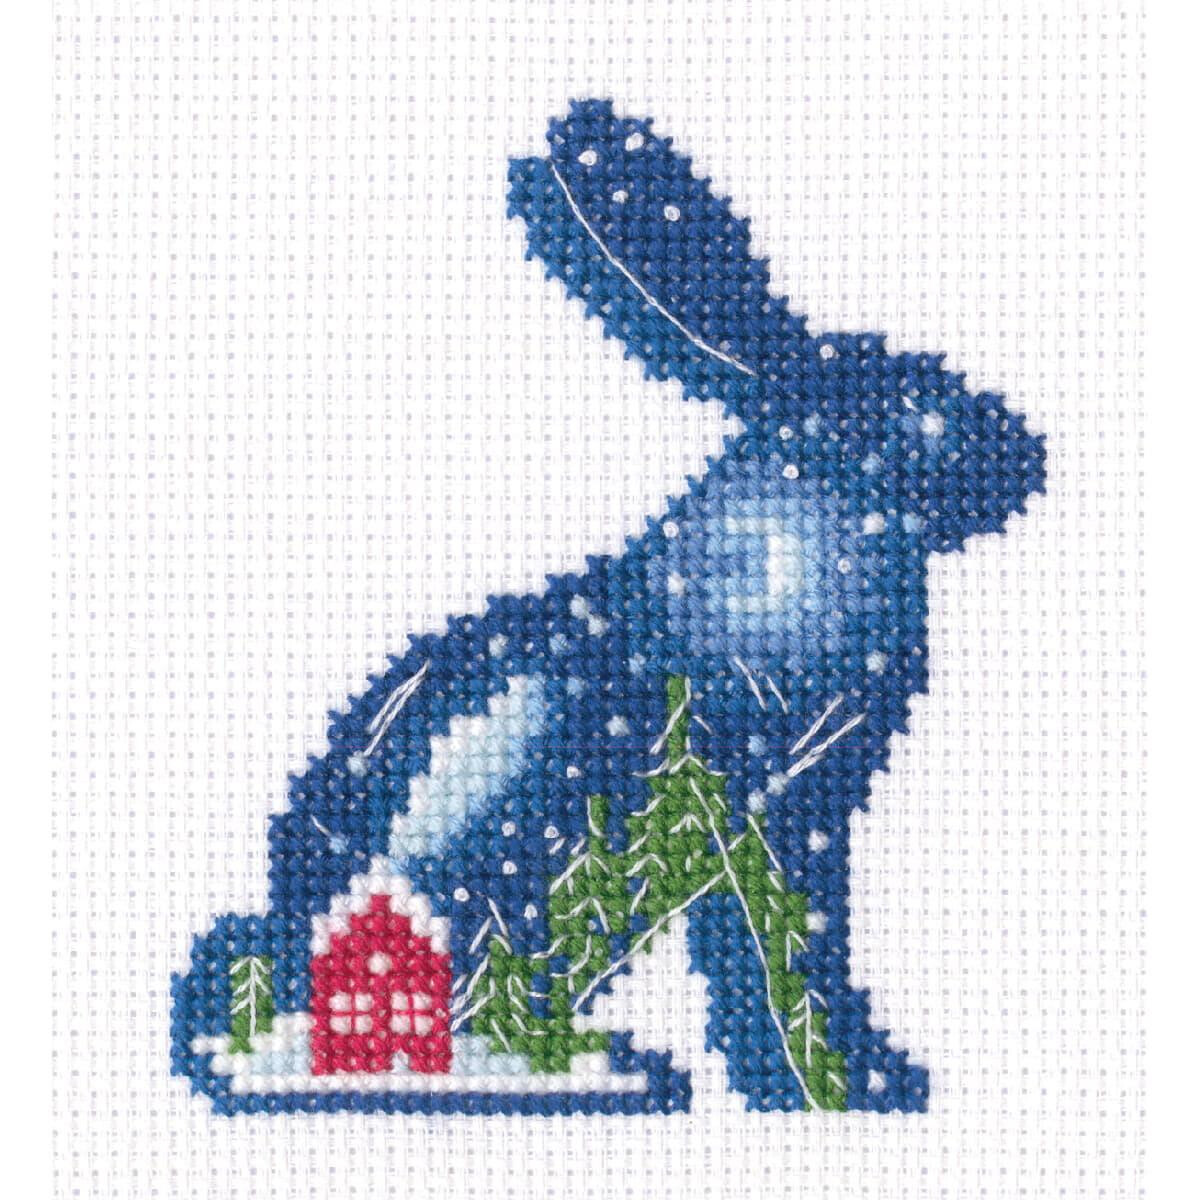 RTO counted cross stitch kit "Bedtime story,...